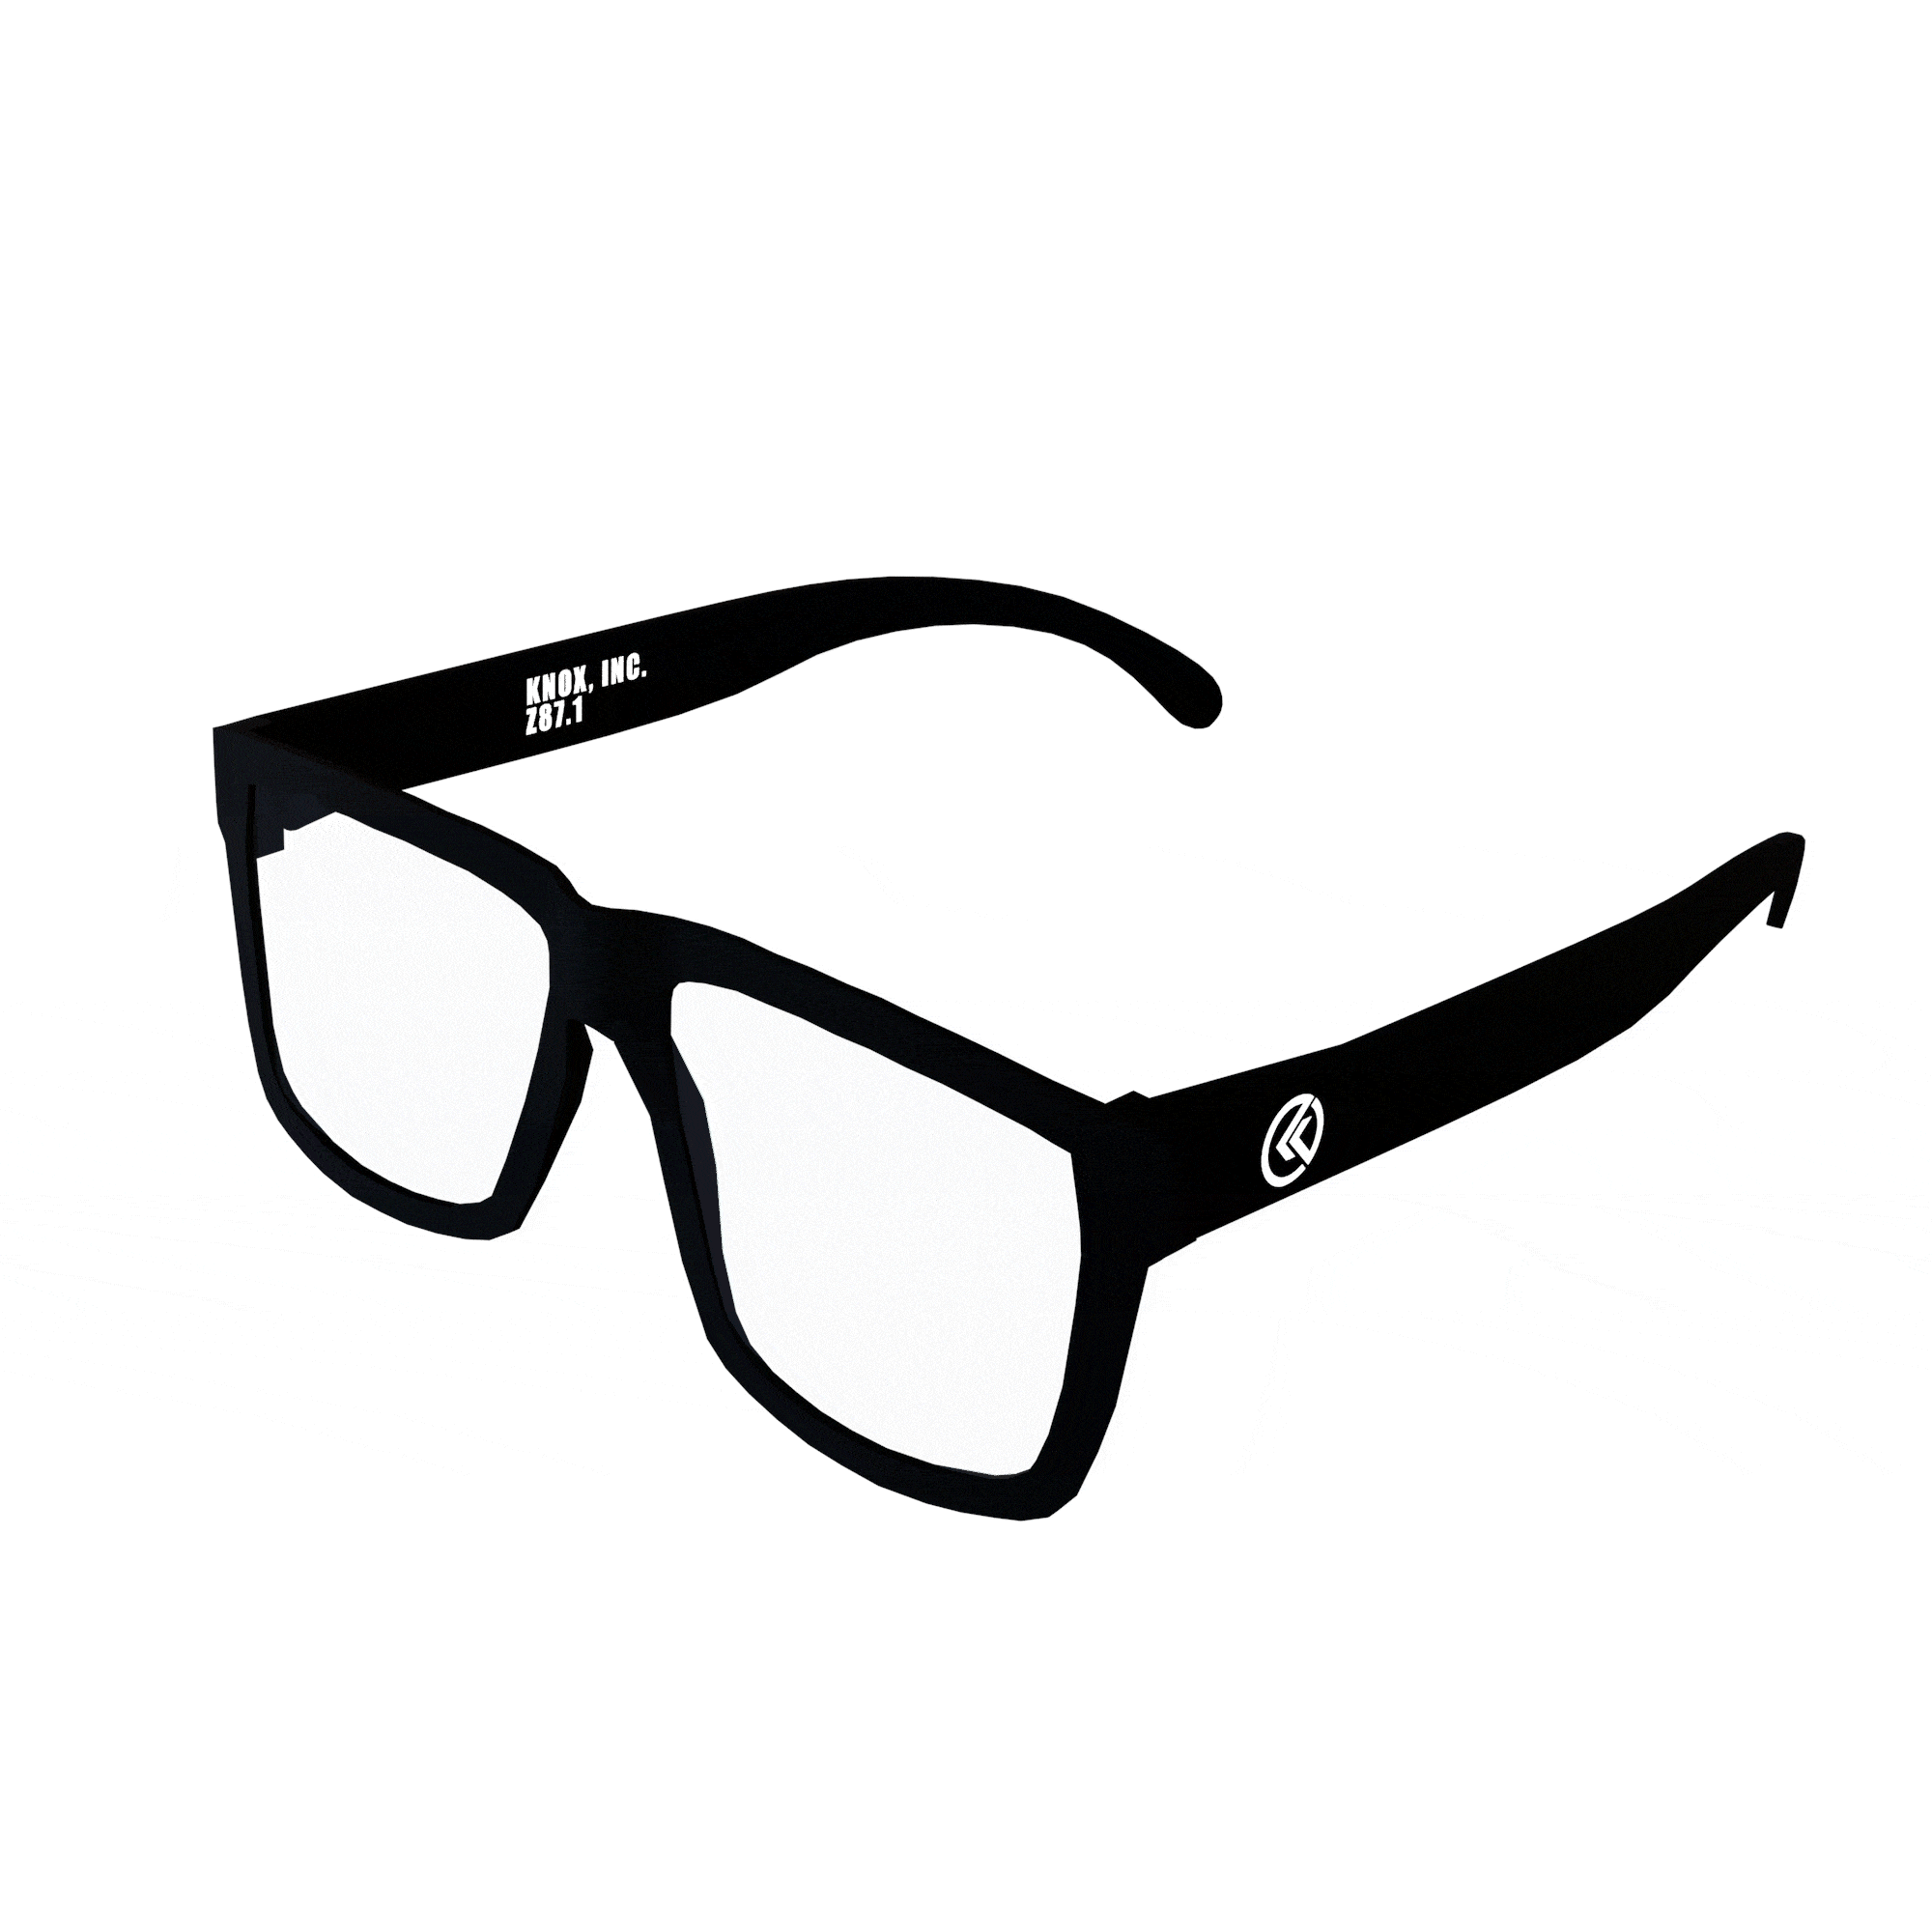 Knox Incorporated Apparel & Accessories The Badger Z87 Sunglasses - Transition Lens